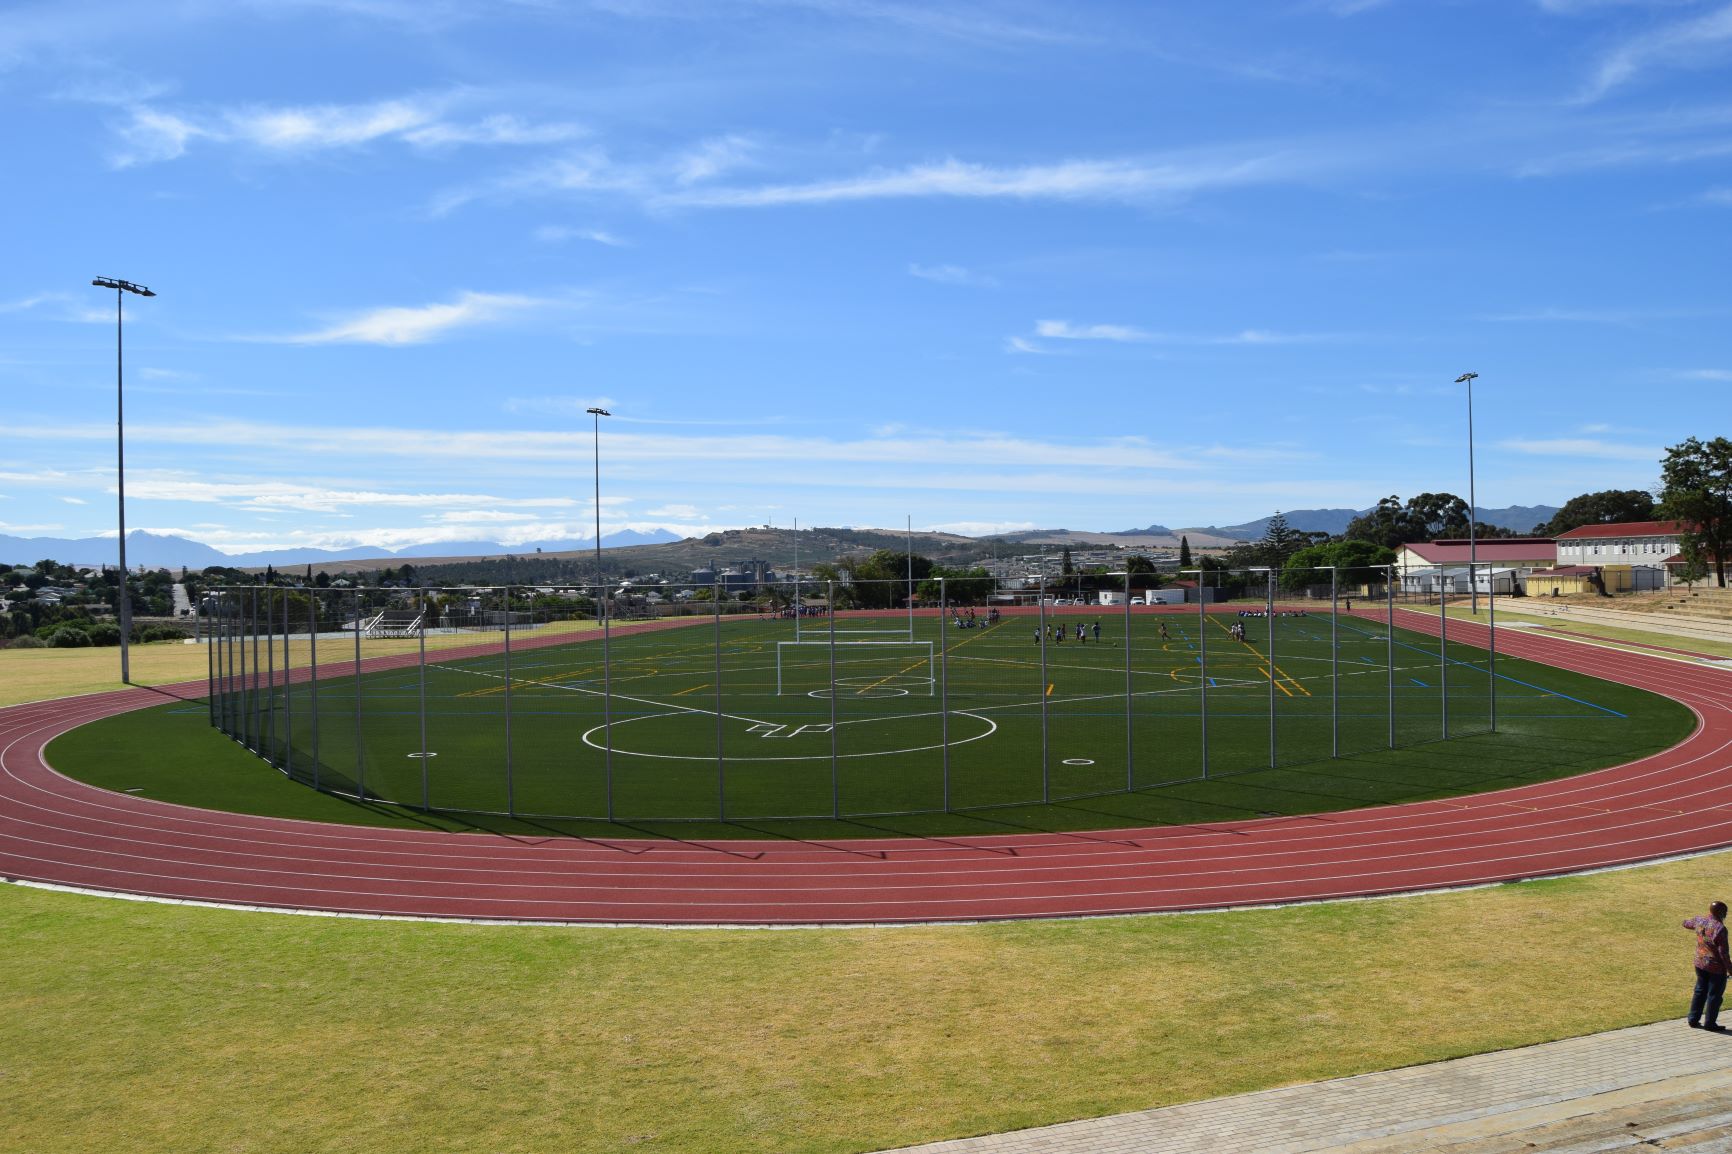 The CARES complex offers a variety of sporting surfaces and fields.